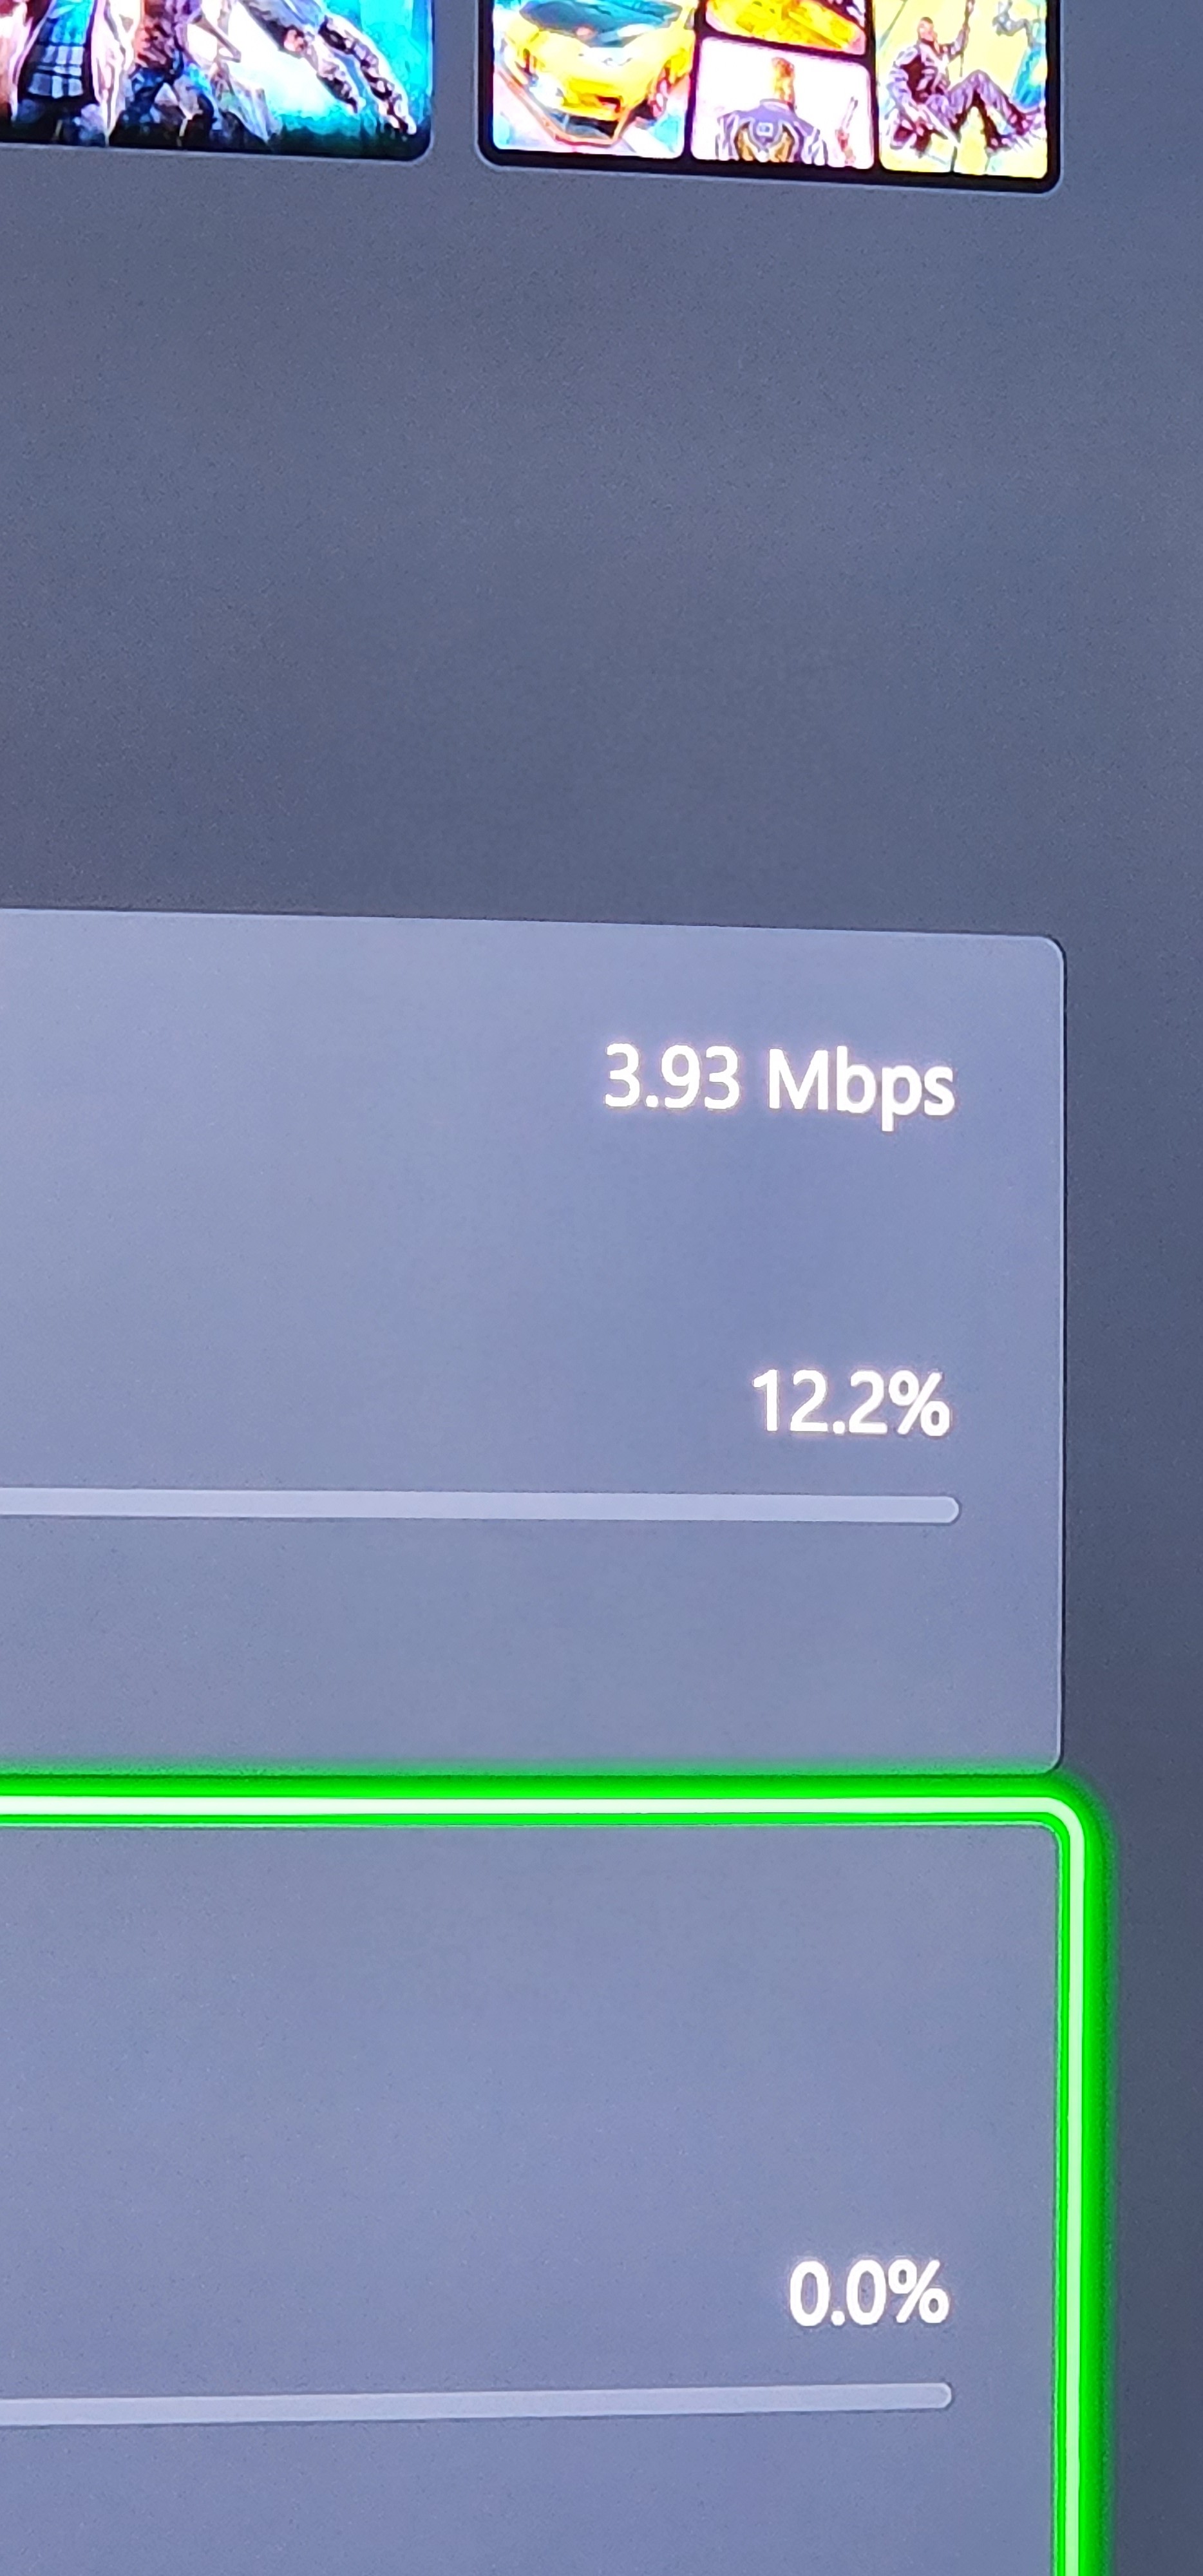 Why do I only get 5-10 mbps when the test shows almost a Gig [​IMG]